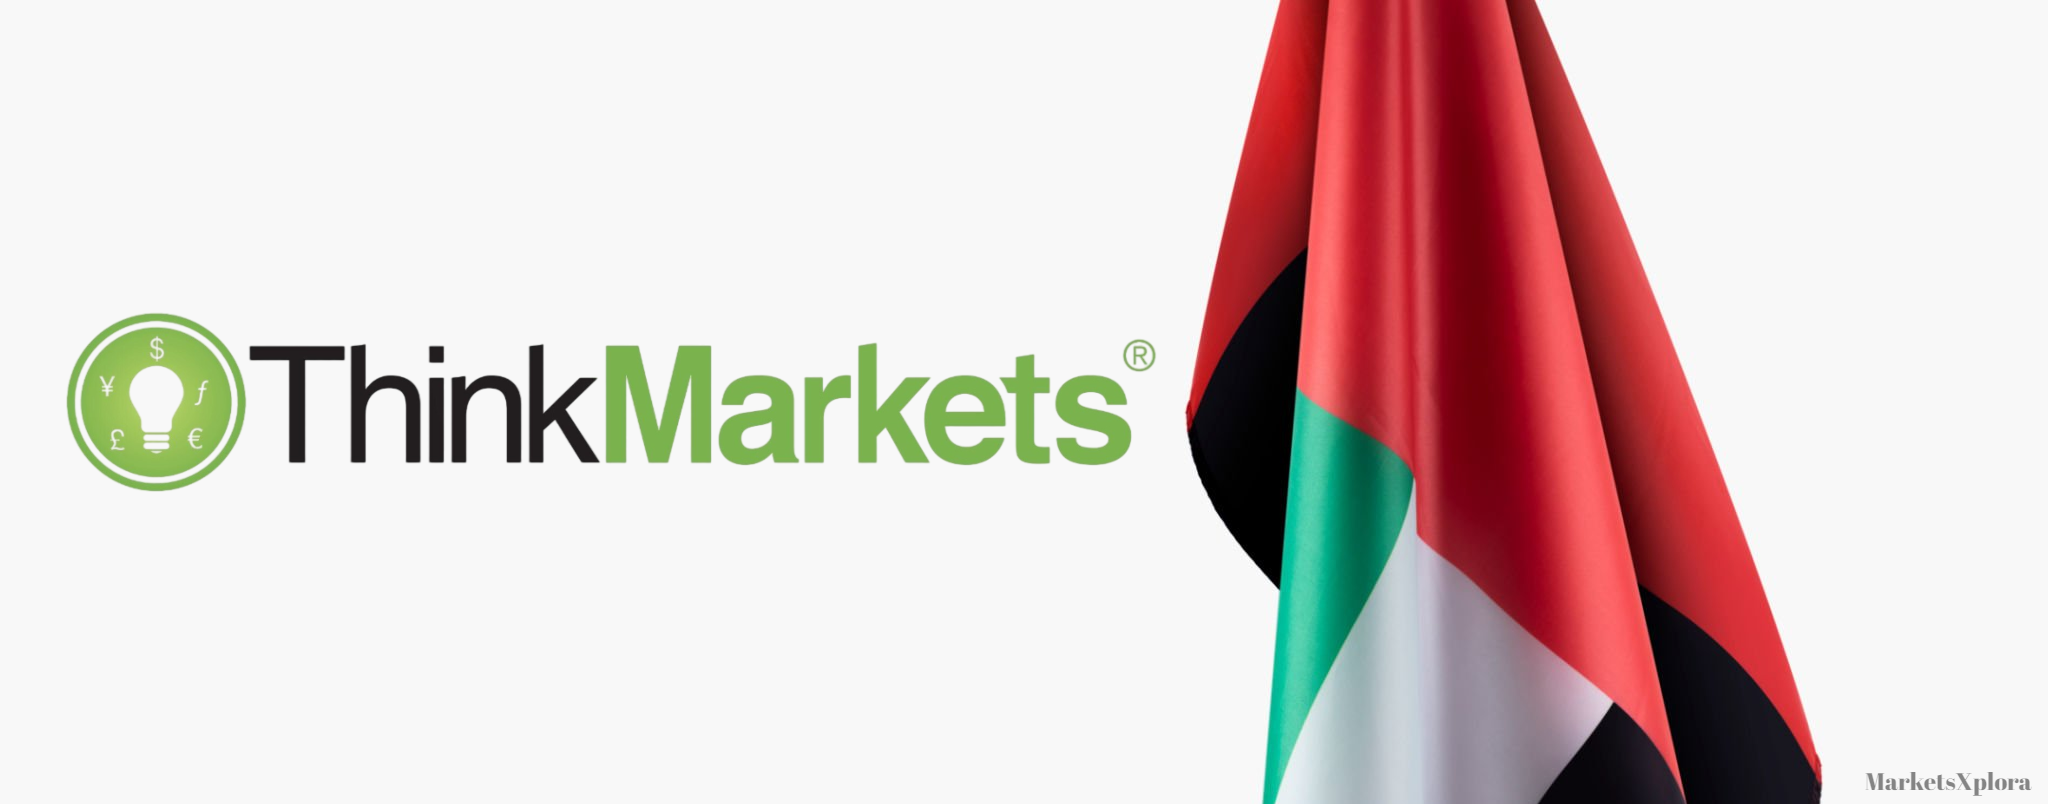 ThinkMarkets has obtained a license from Dubai authorities to provide regulated trading access to investors in the high-growth UAE market.